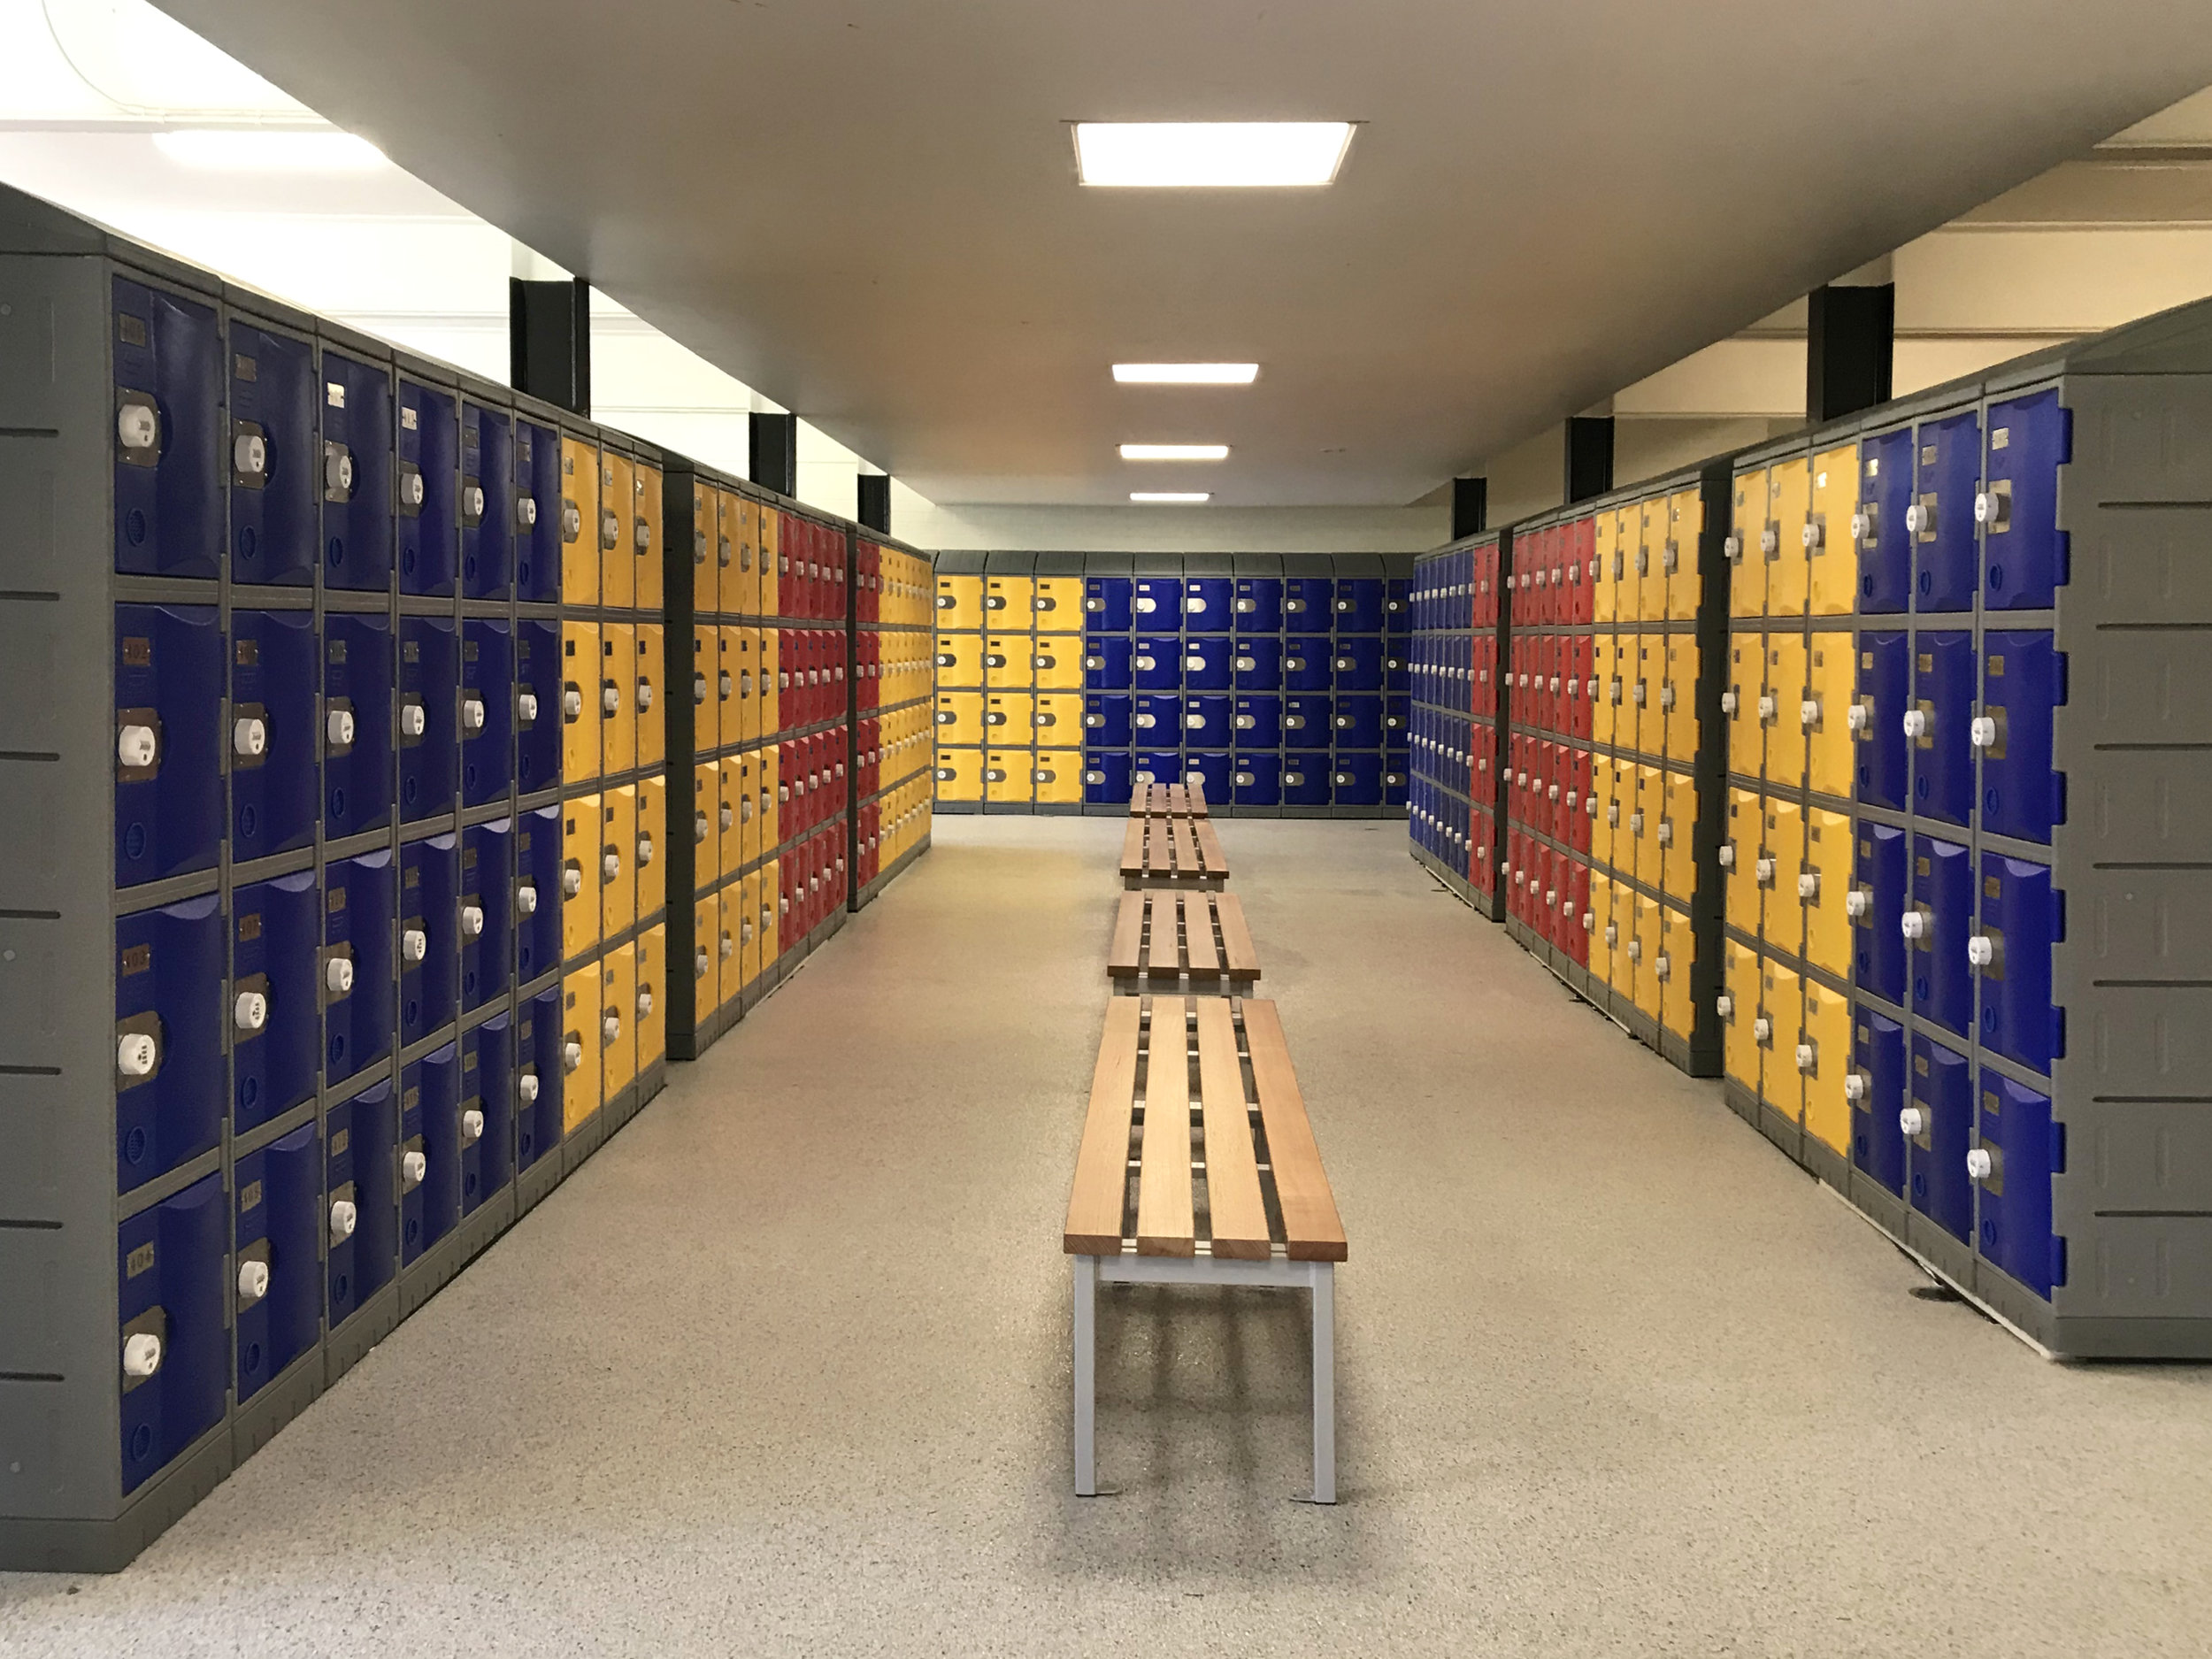 Combination of blue, yellow and red heavy duty plastic lockers